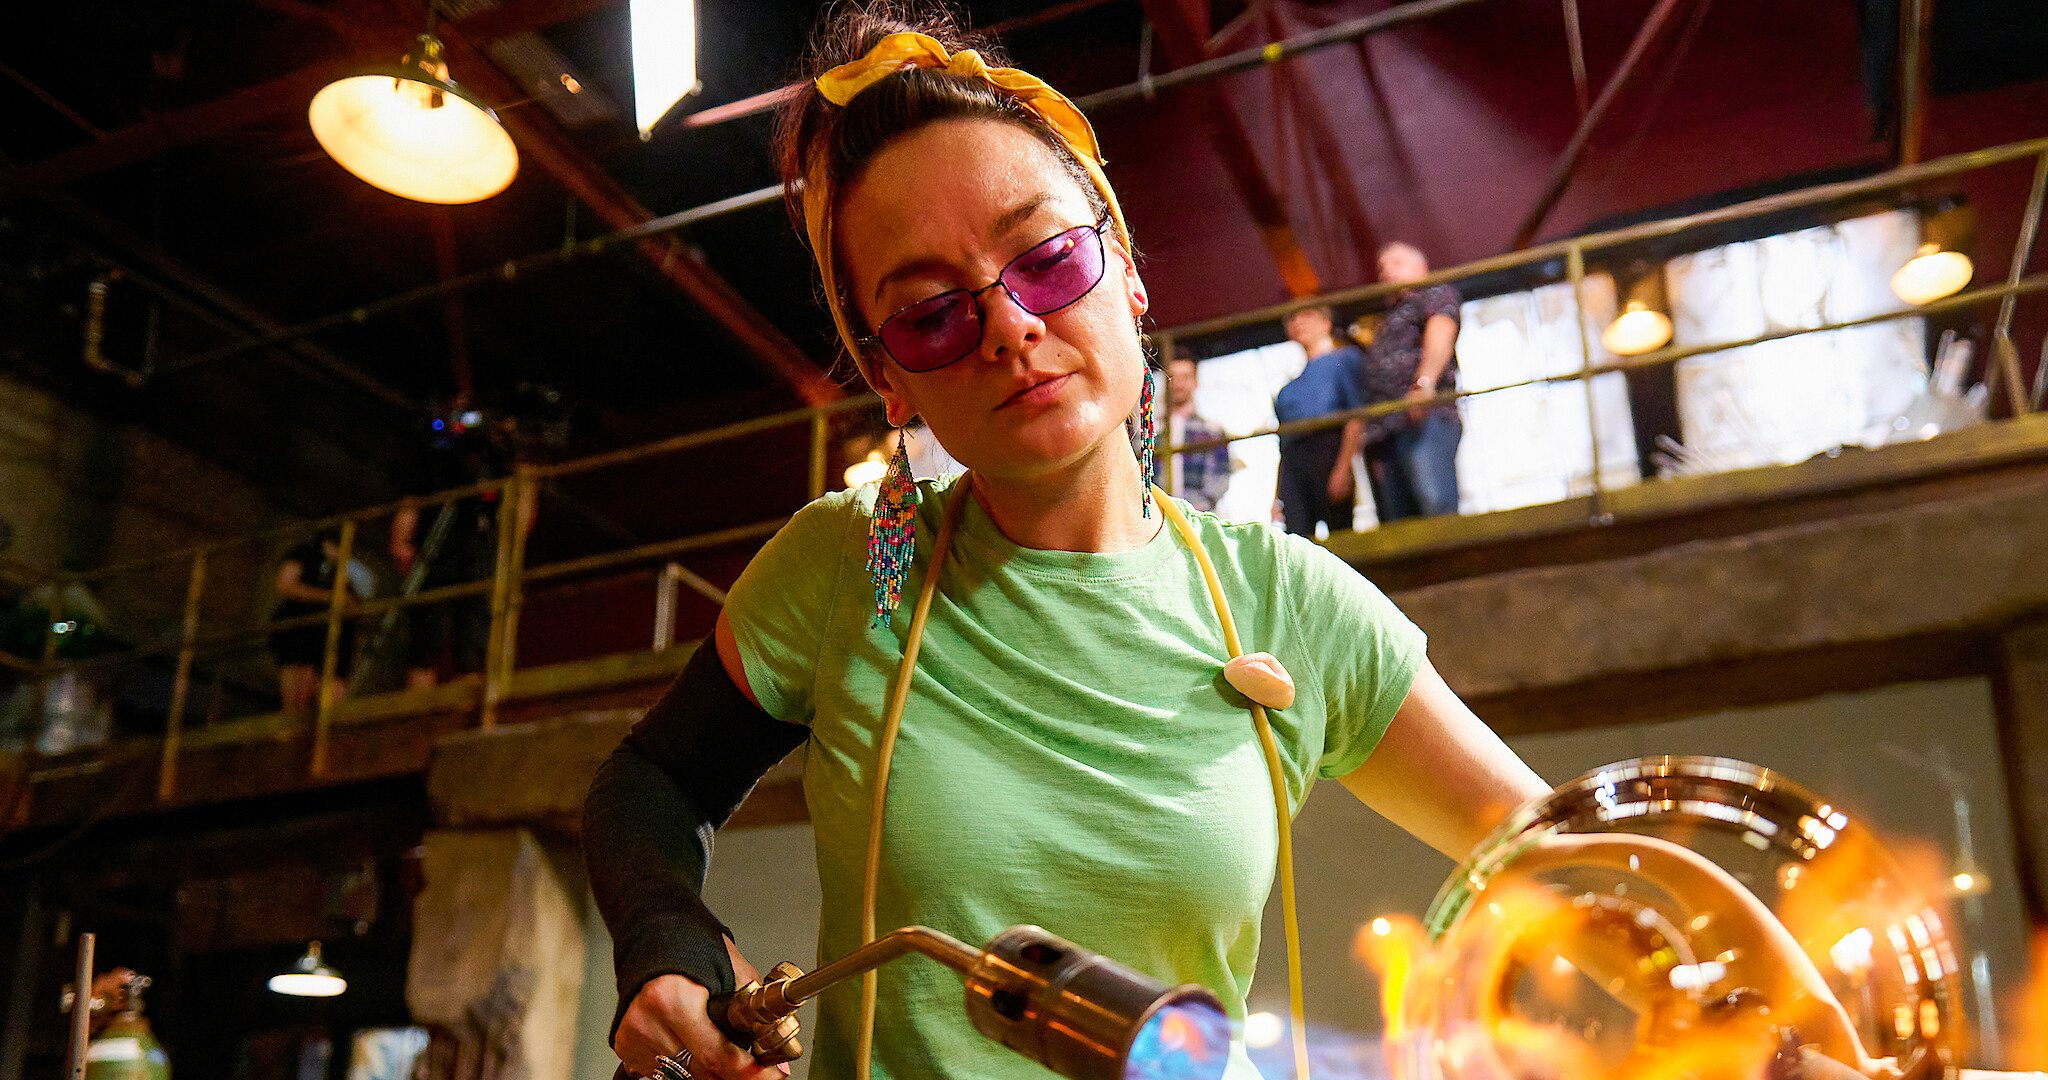 Scientific Glass Blower Shows How He Uses His Specialized Skills